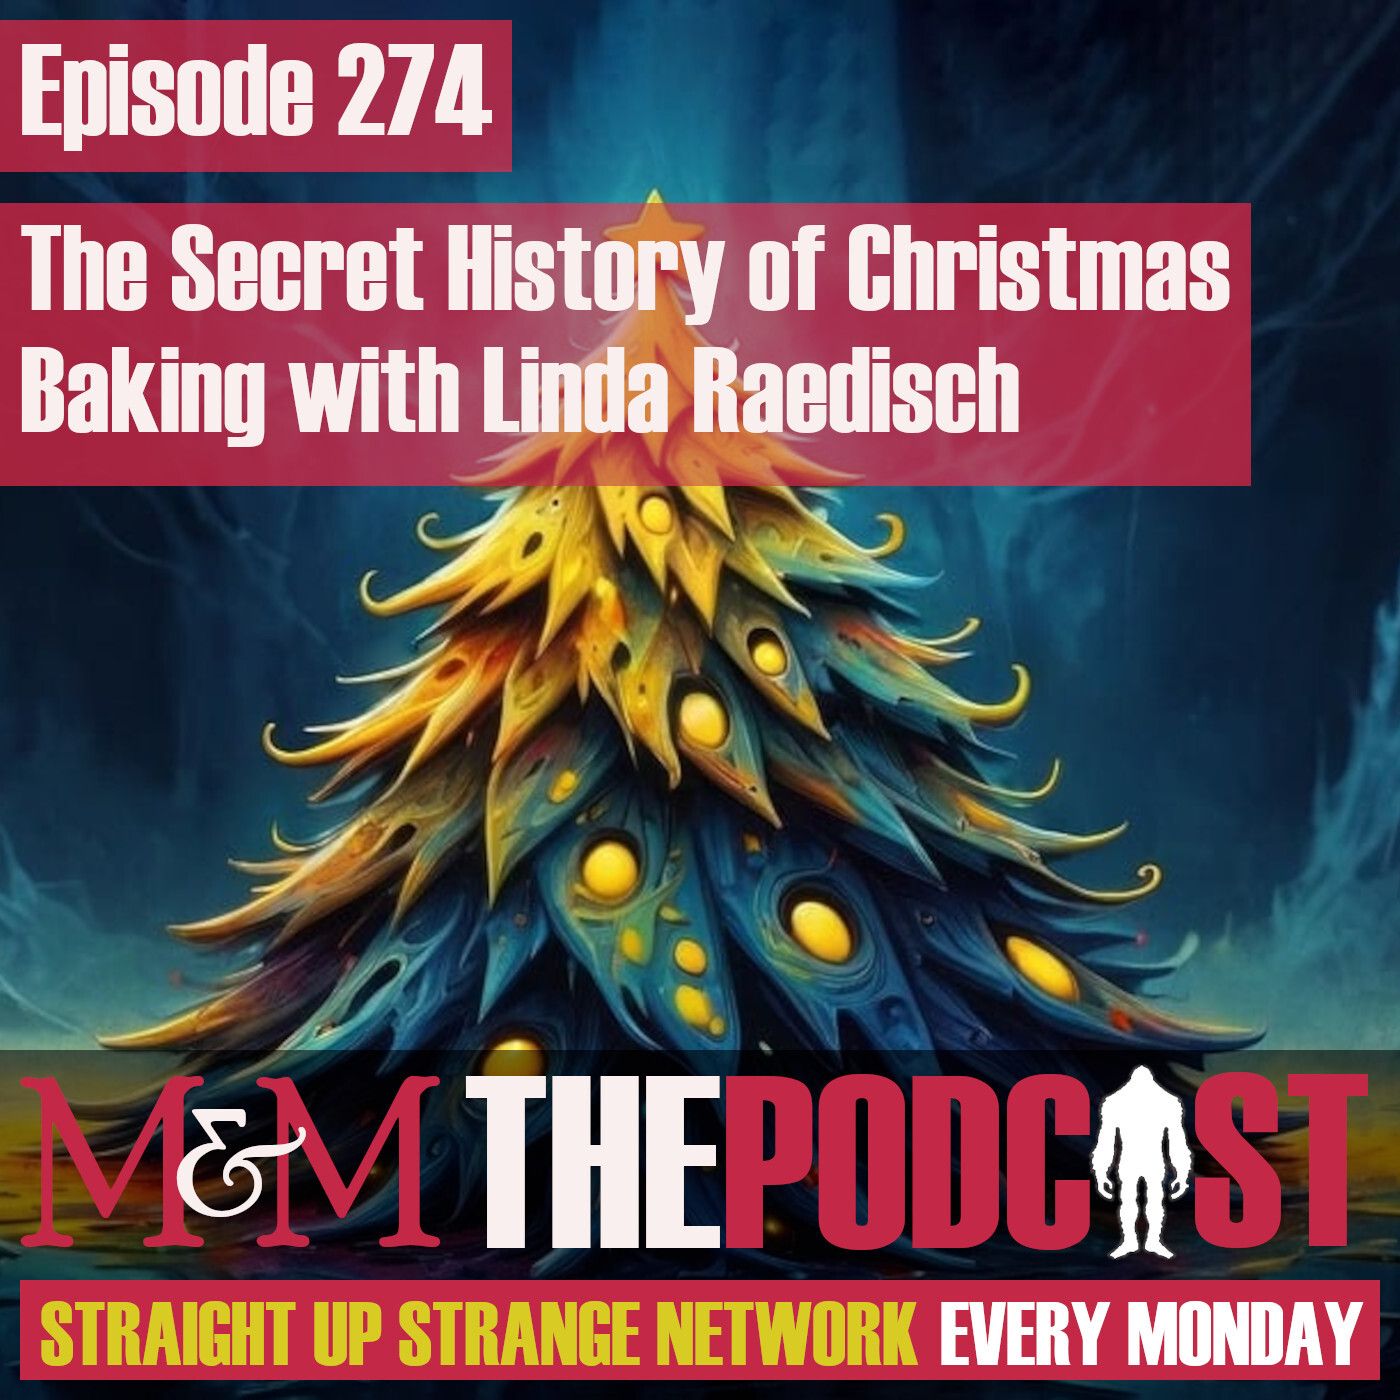 Mysteries and Monsters: Episode 274 The Secret History of Christmas Baking with Linda Raedisch